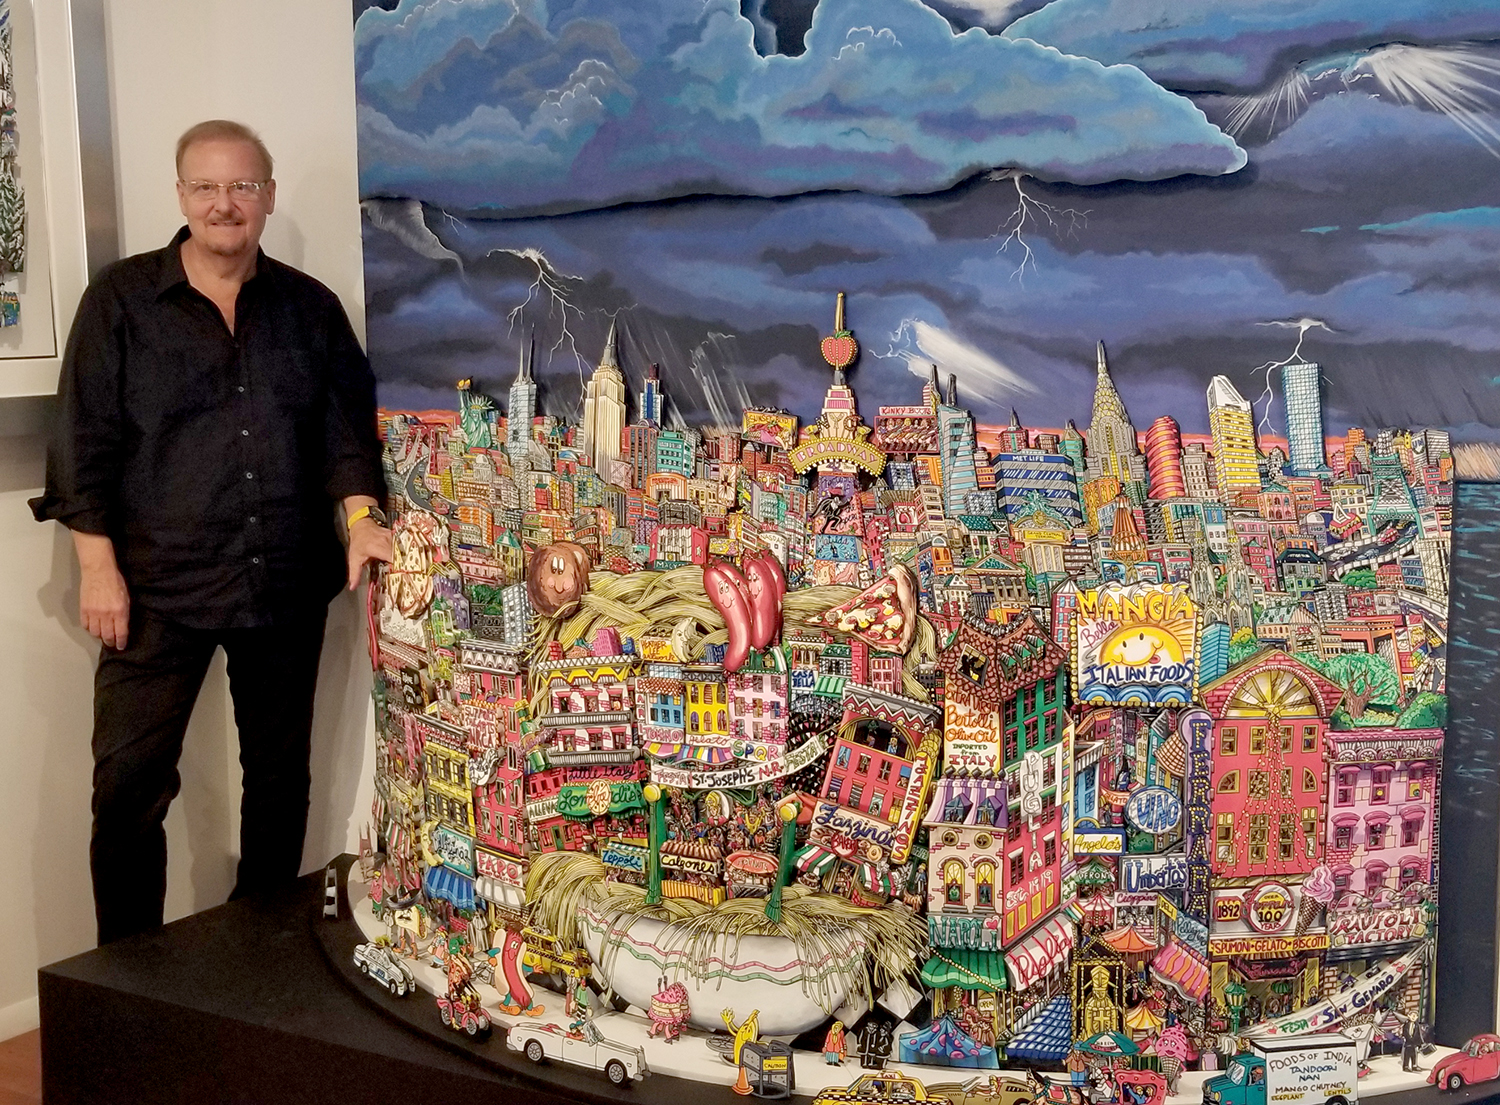 Fazzino standing next to very large artwork he recently created